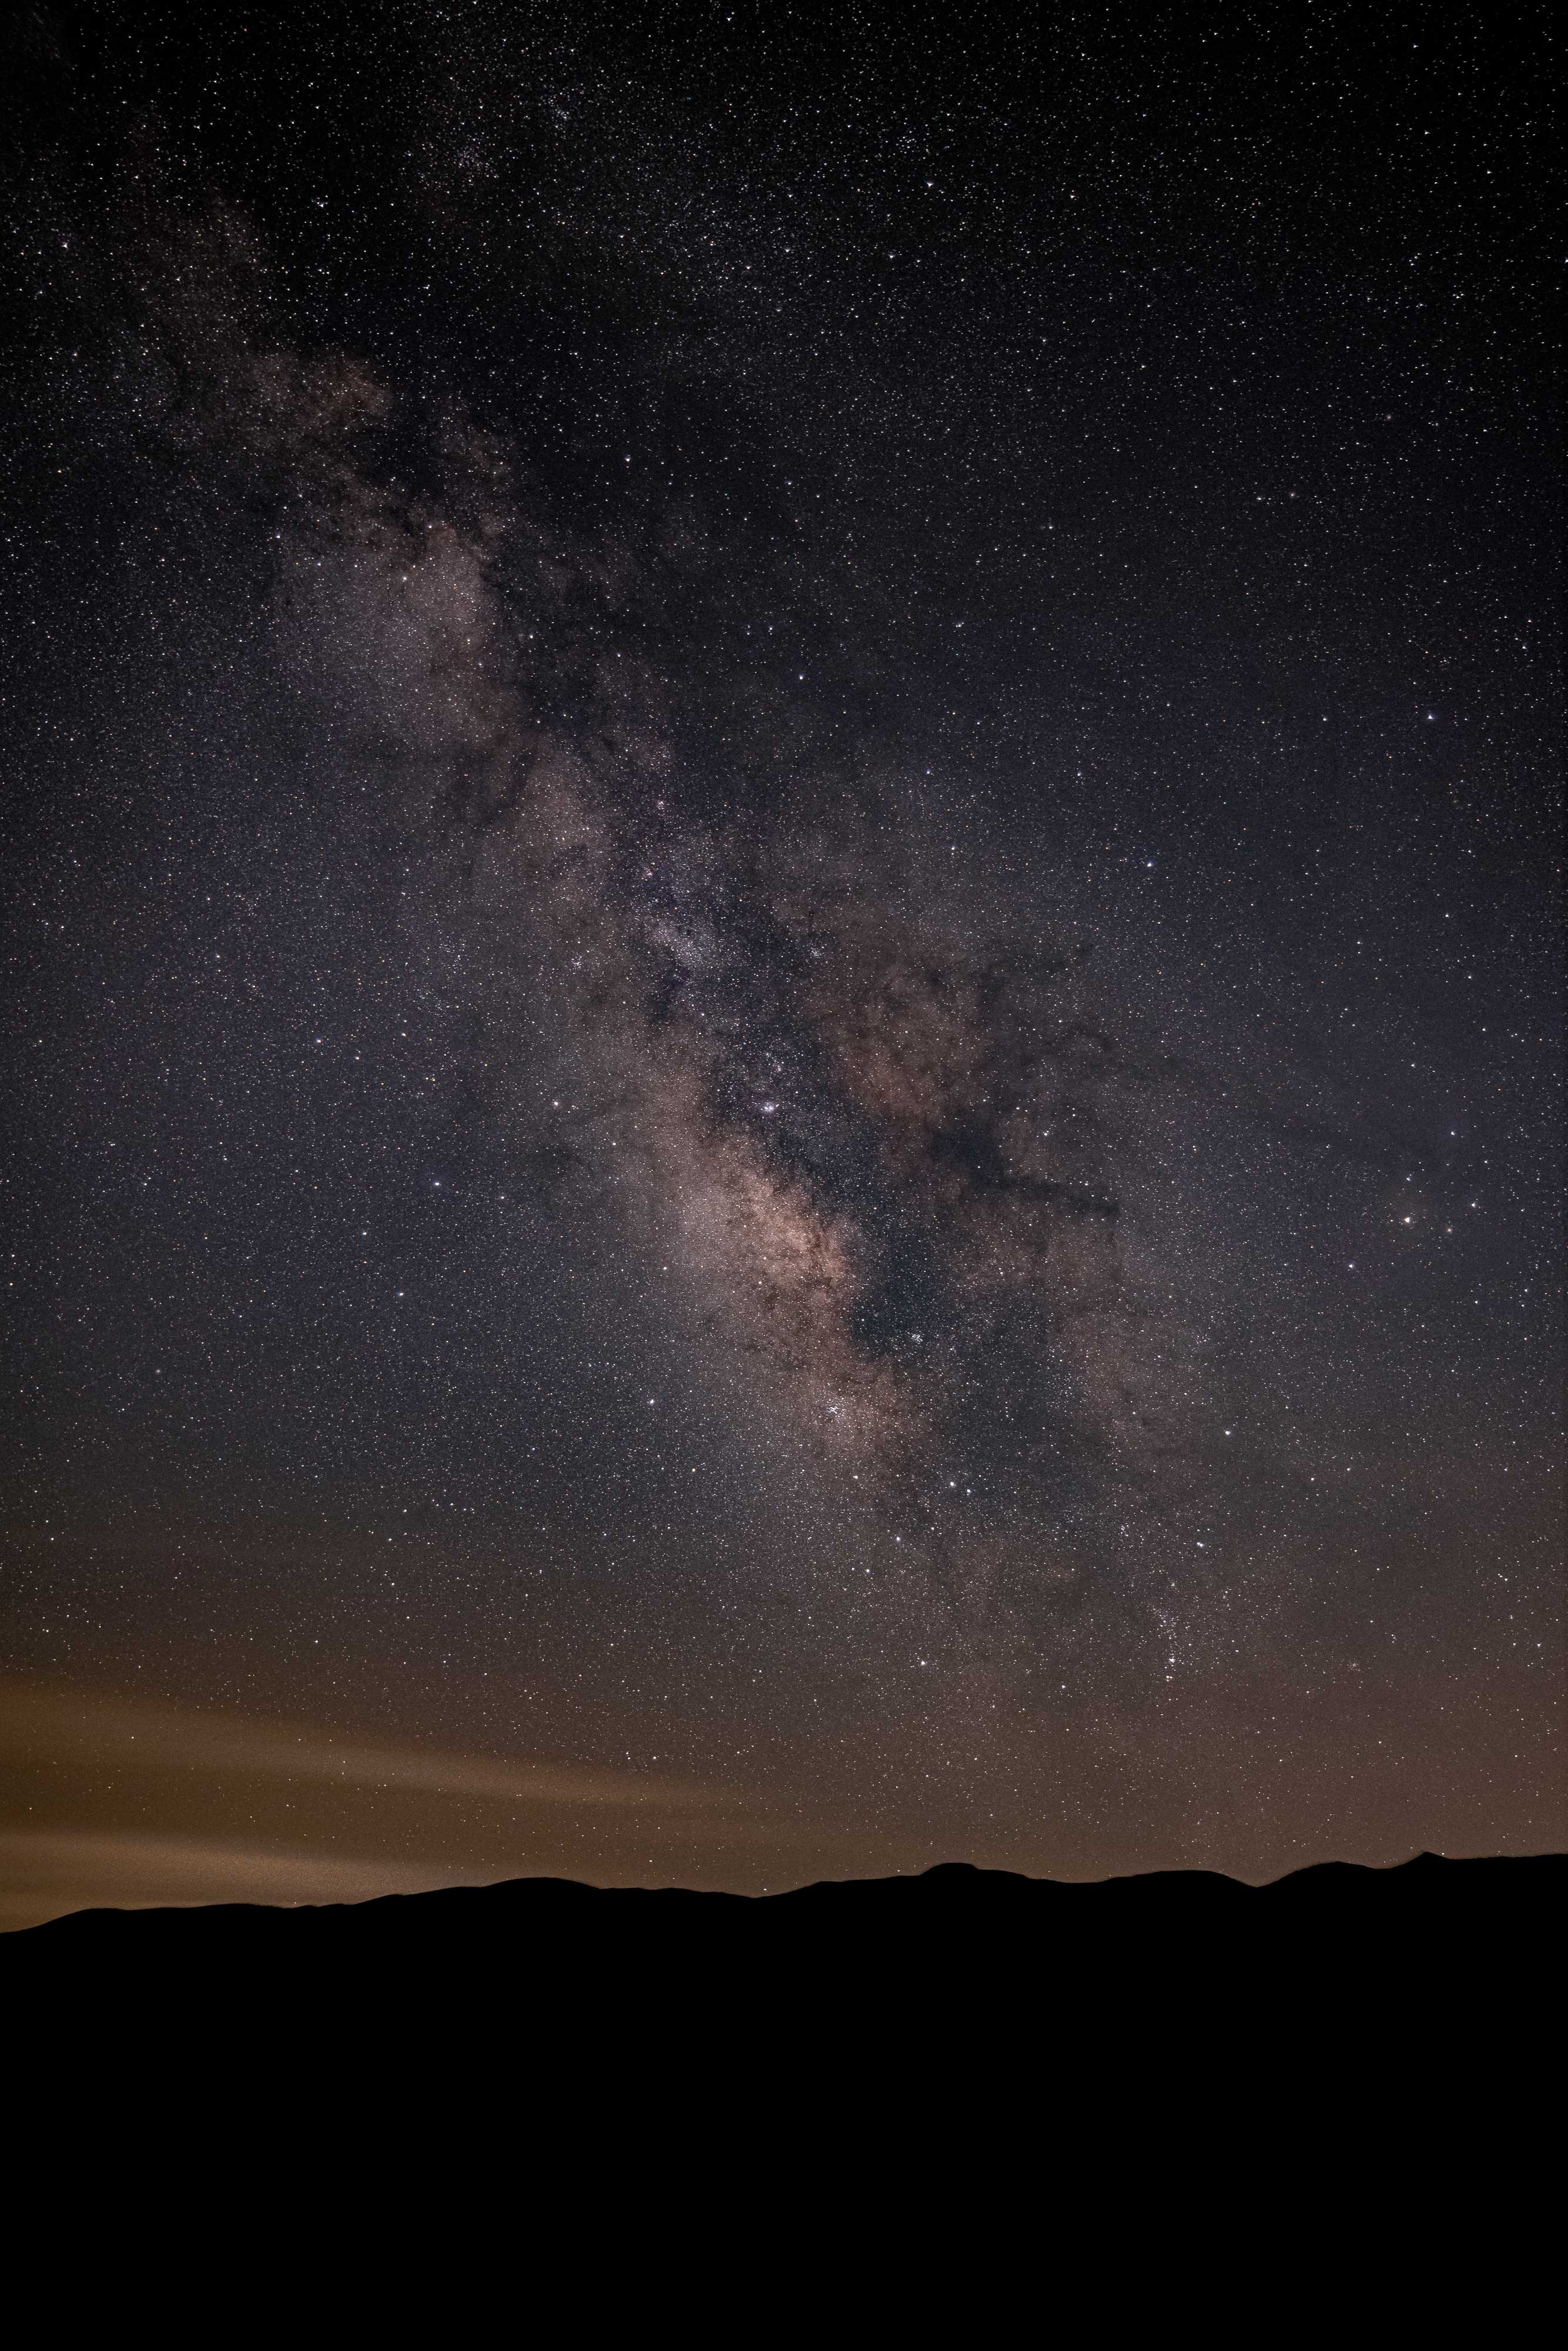 The almost infinte stars that form the bands of the milky way galaxy swirl in the night sky over a mountainous horizon